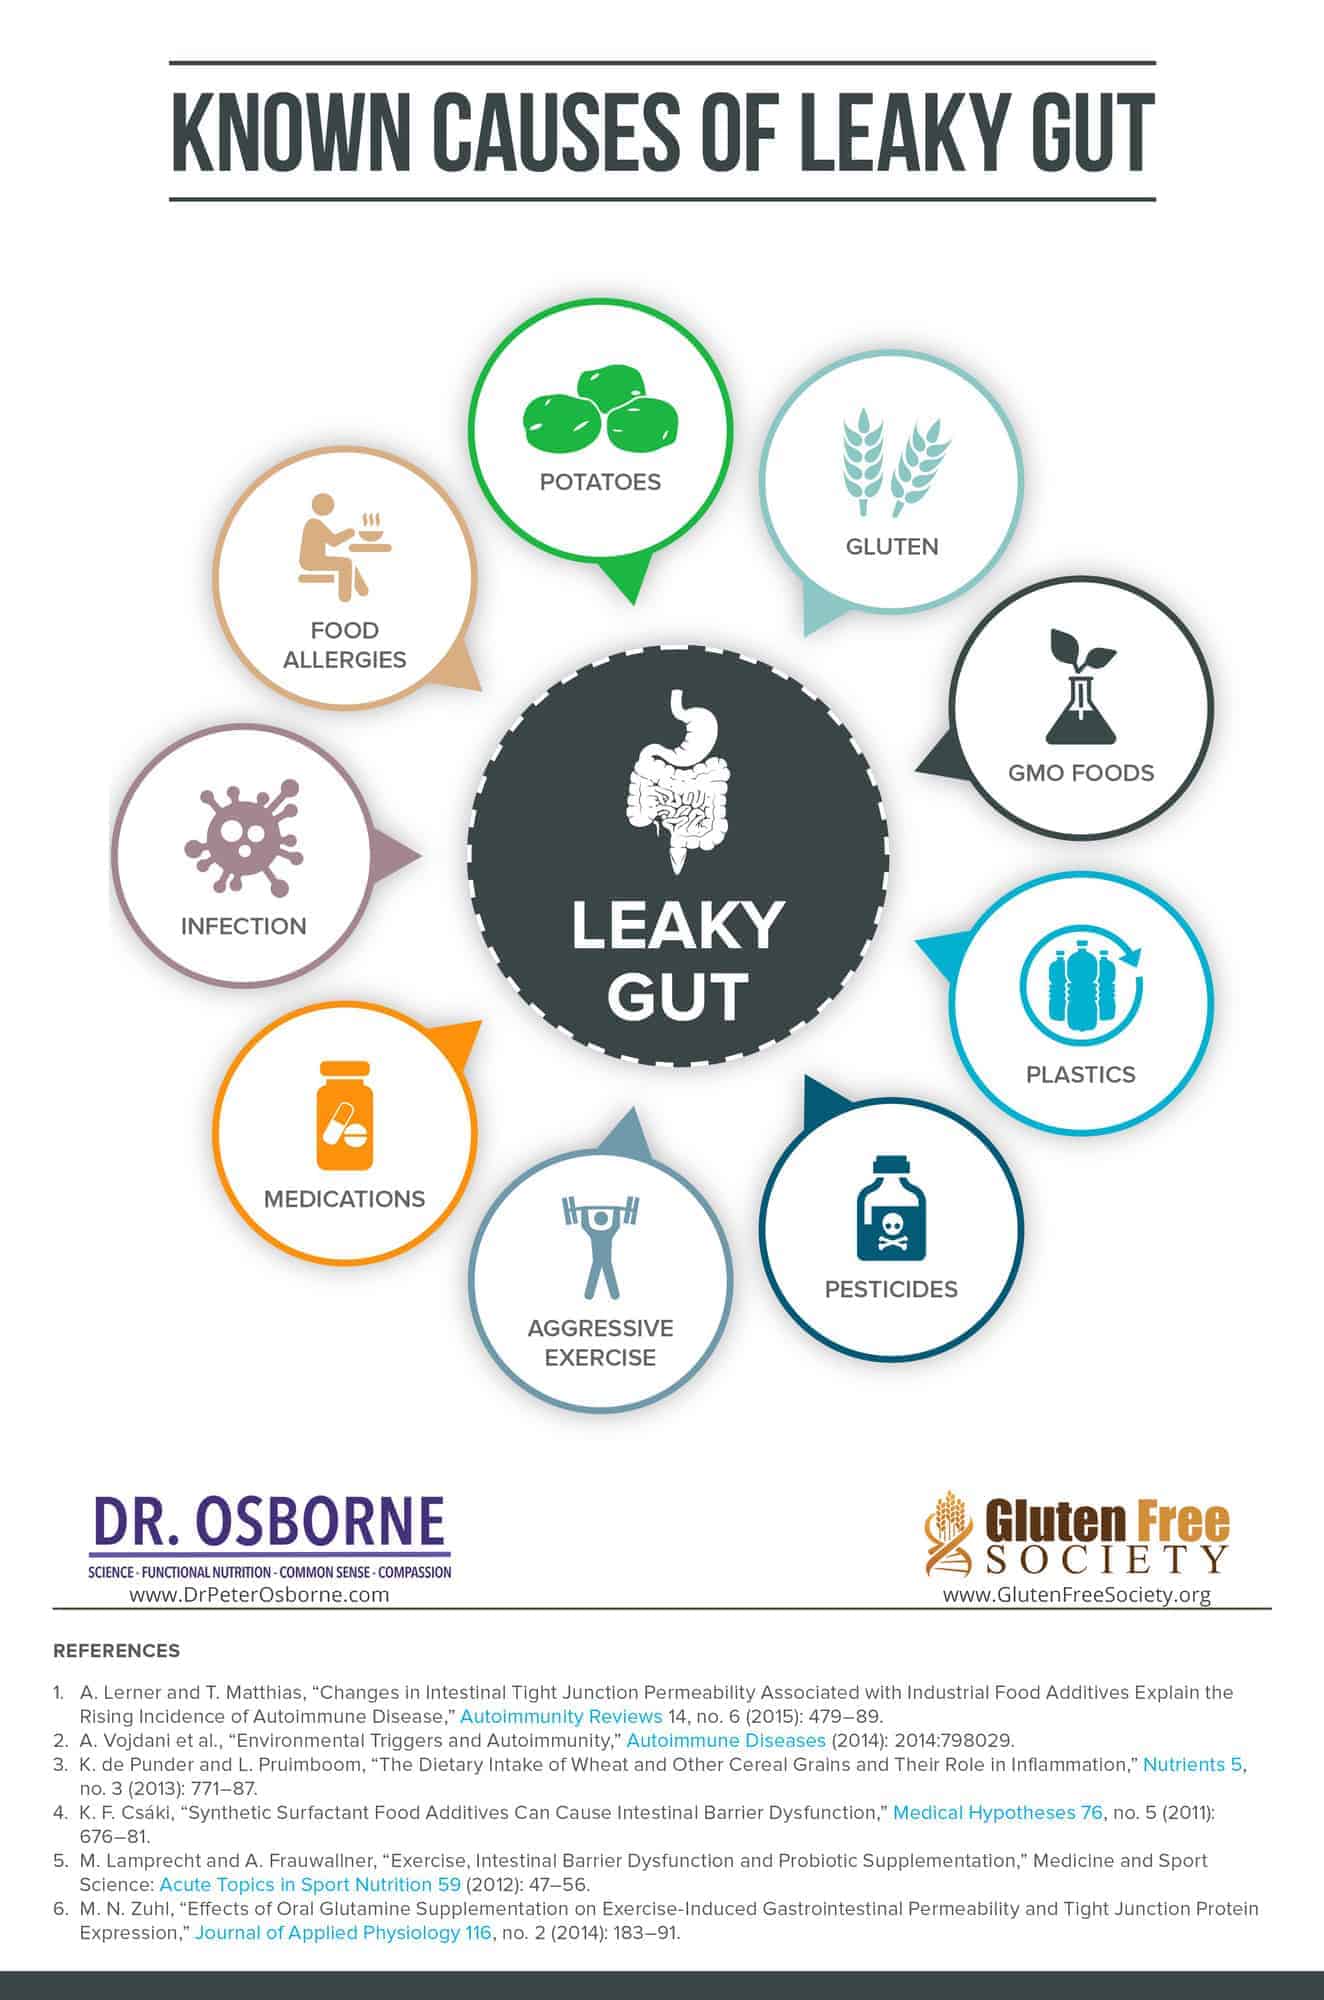 10 Tips To Help Restore a Leaky Gut Naturally &  Safely